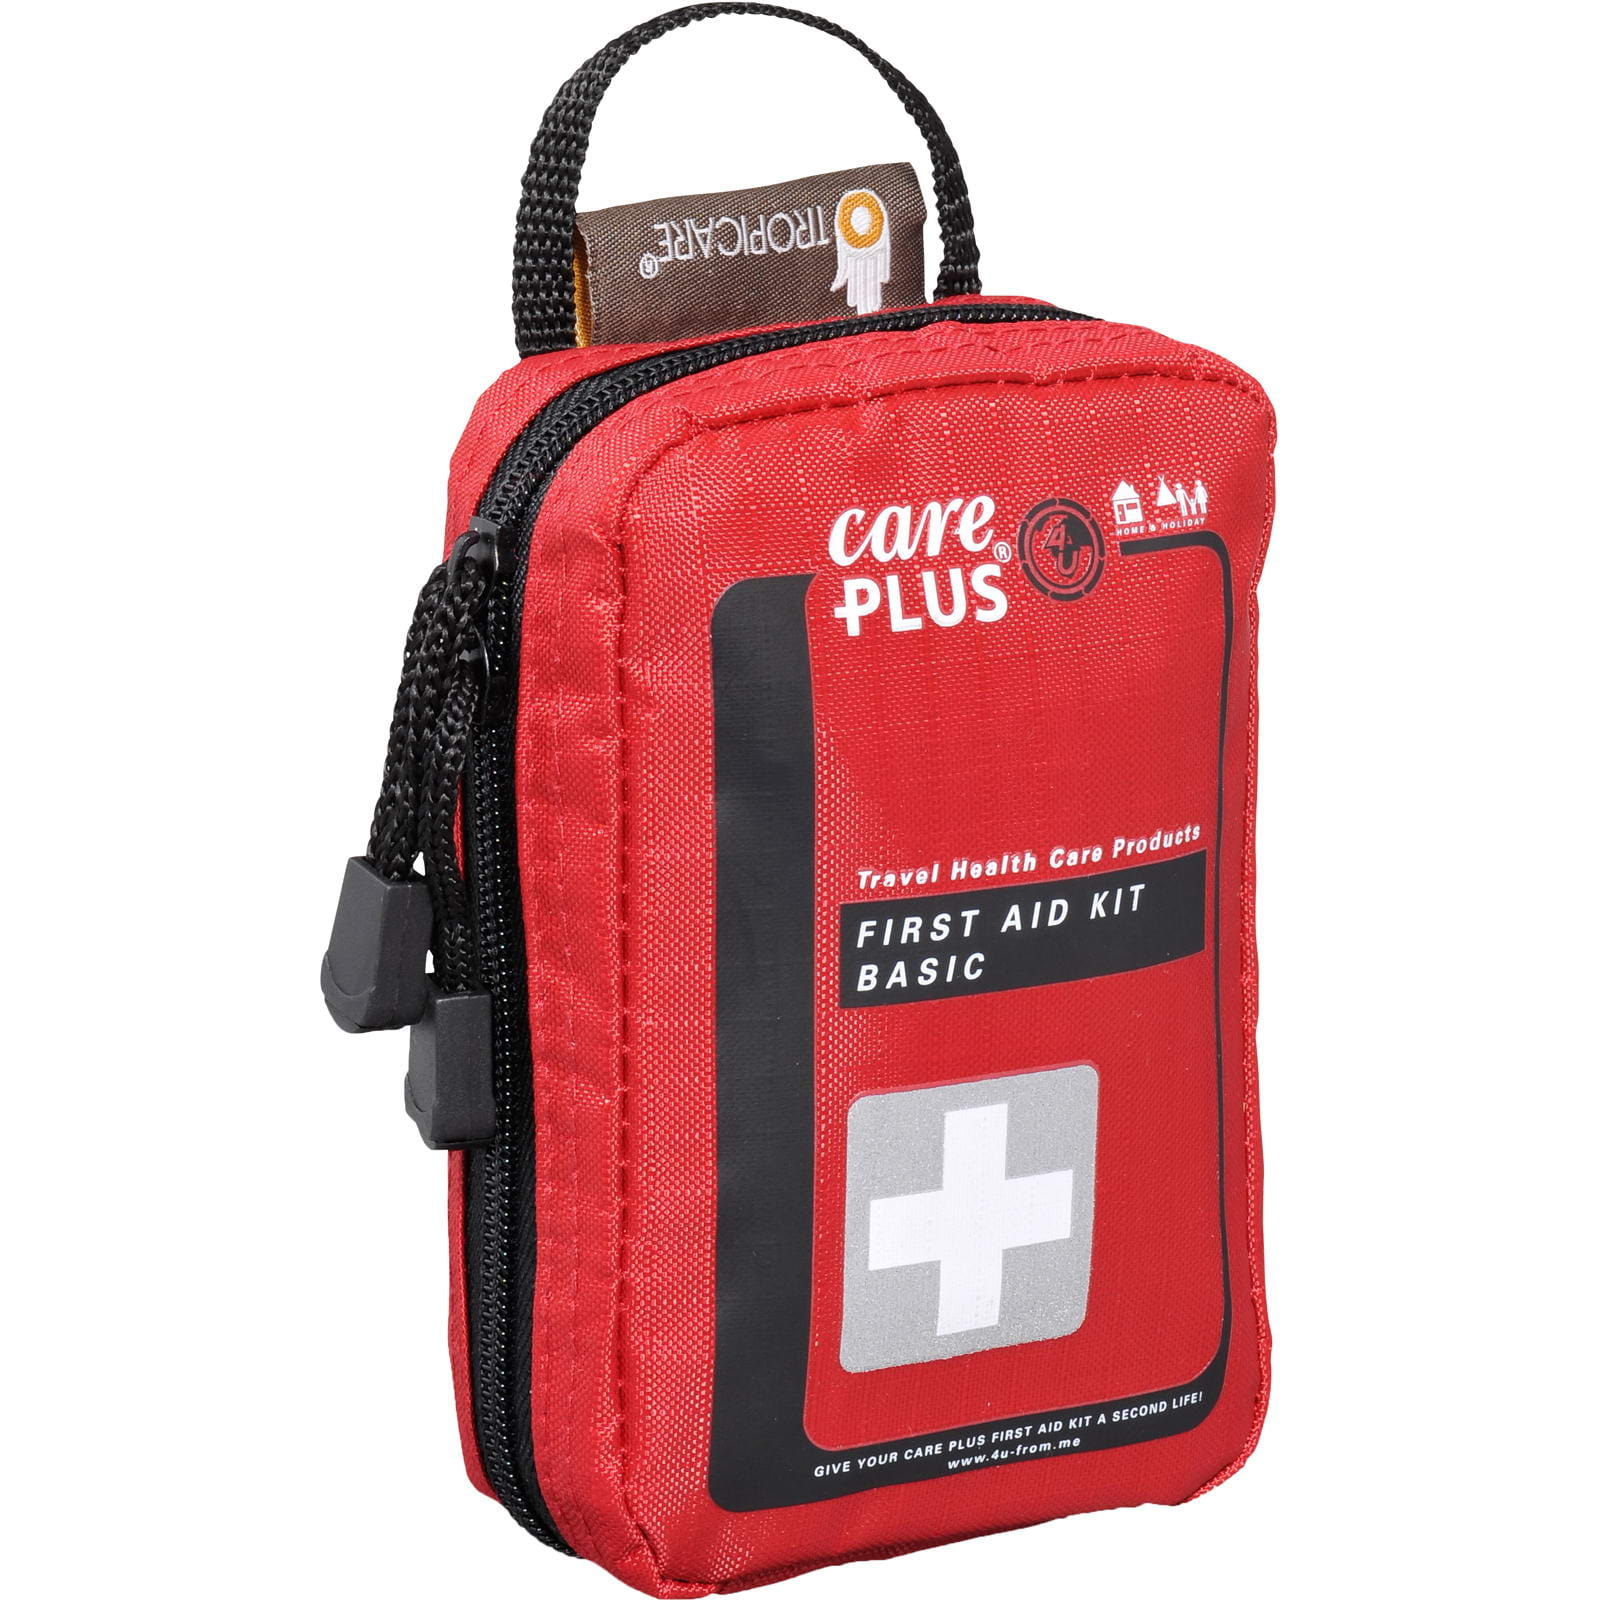 https://outdoortrends3.shop-cdn.com/media/image/ee/g0/95/care-plus-first-aid-kit-basic-car-38331-_0.jpg